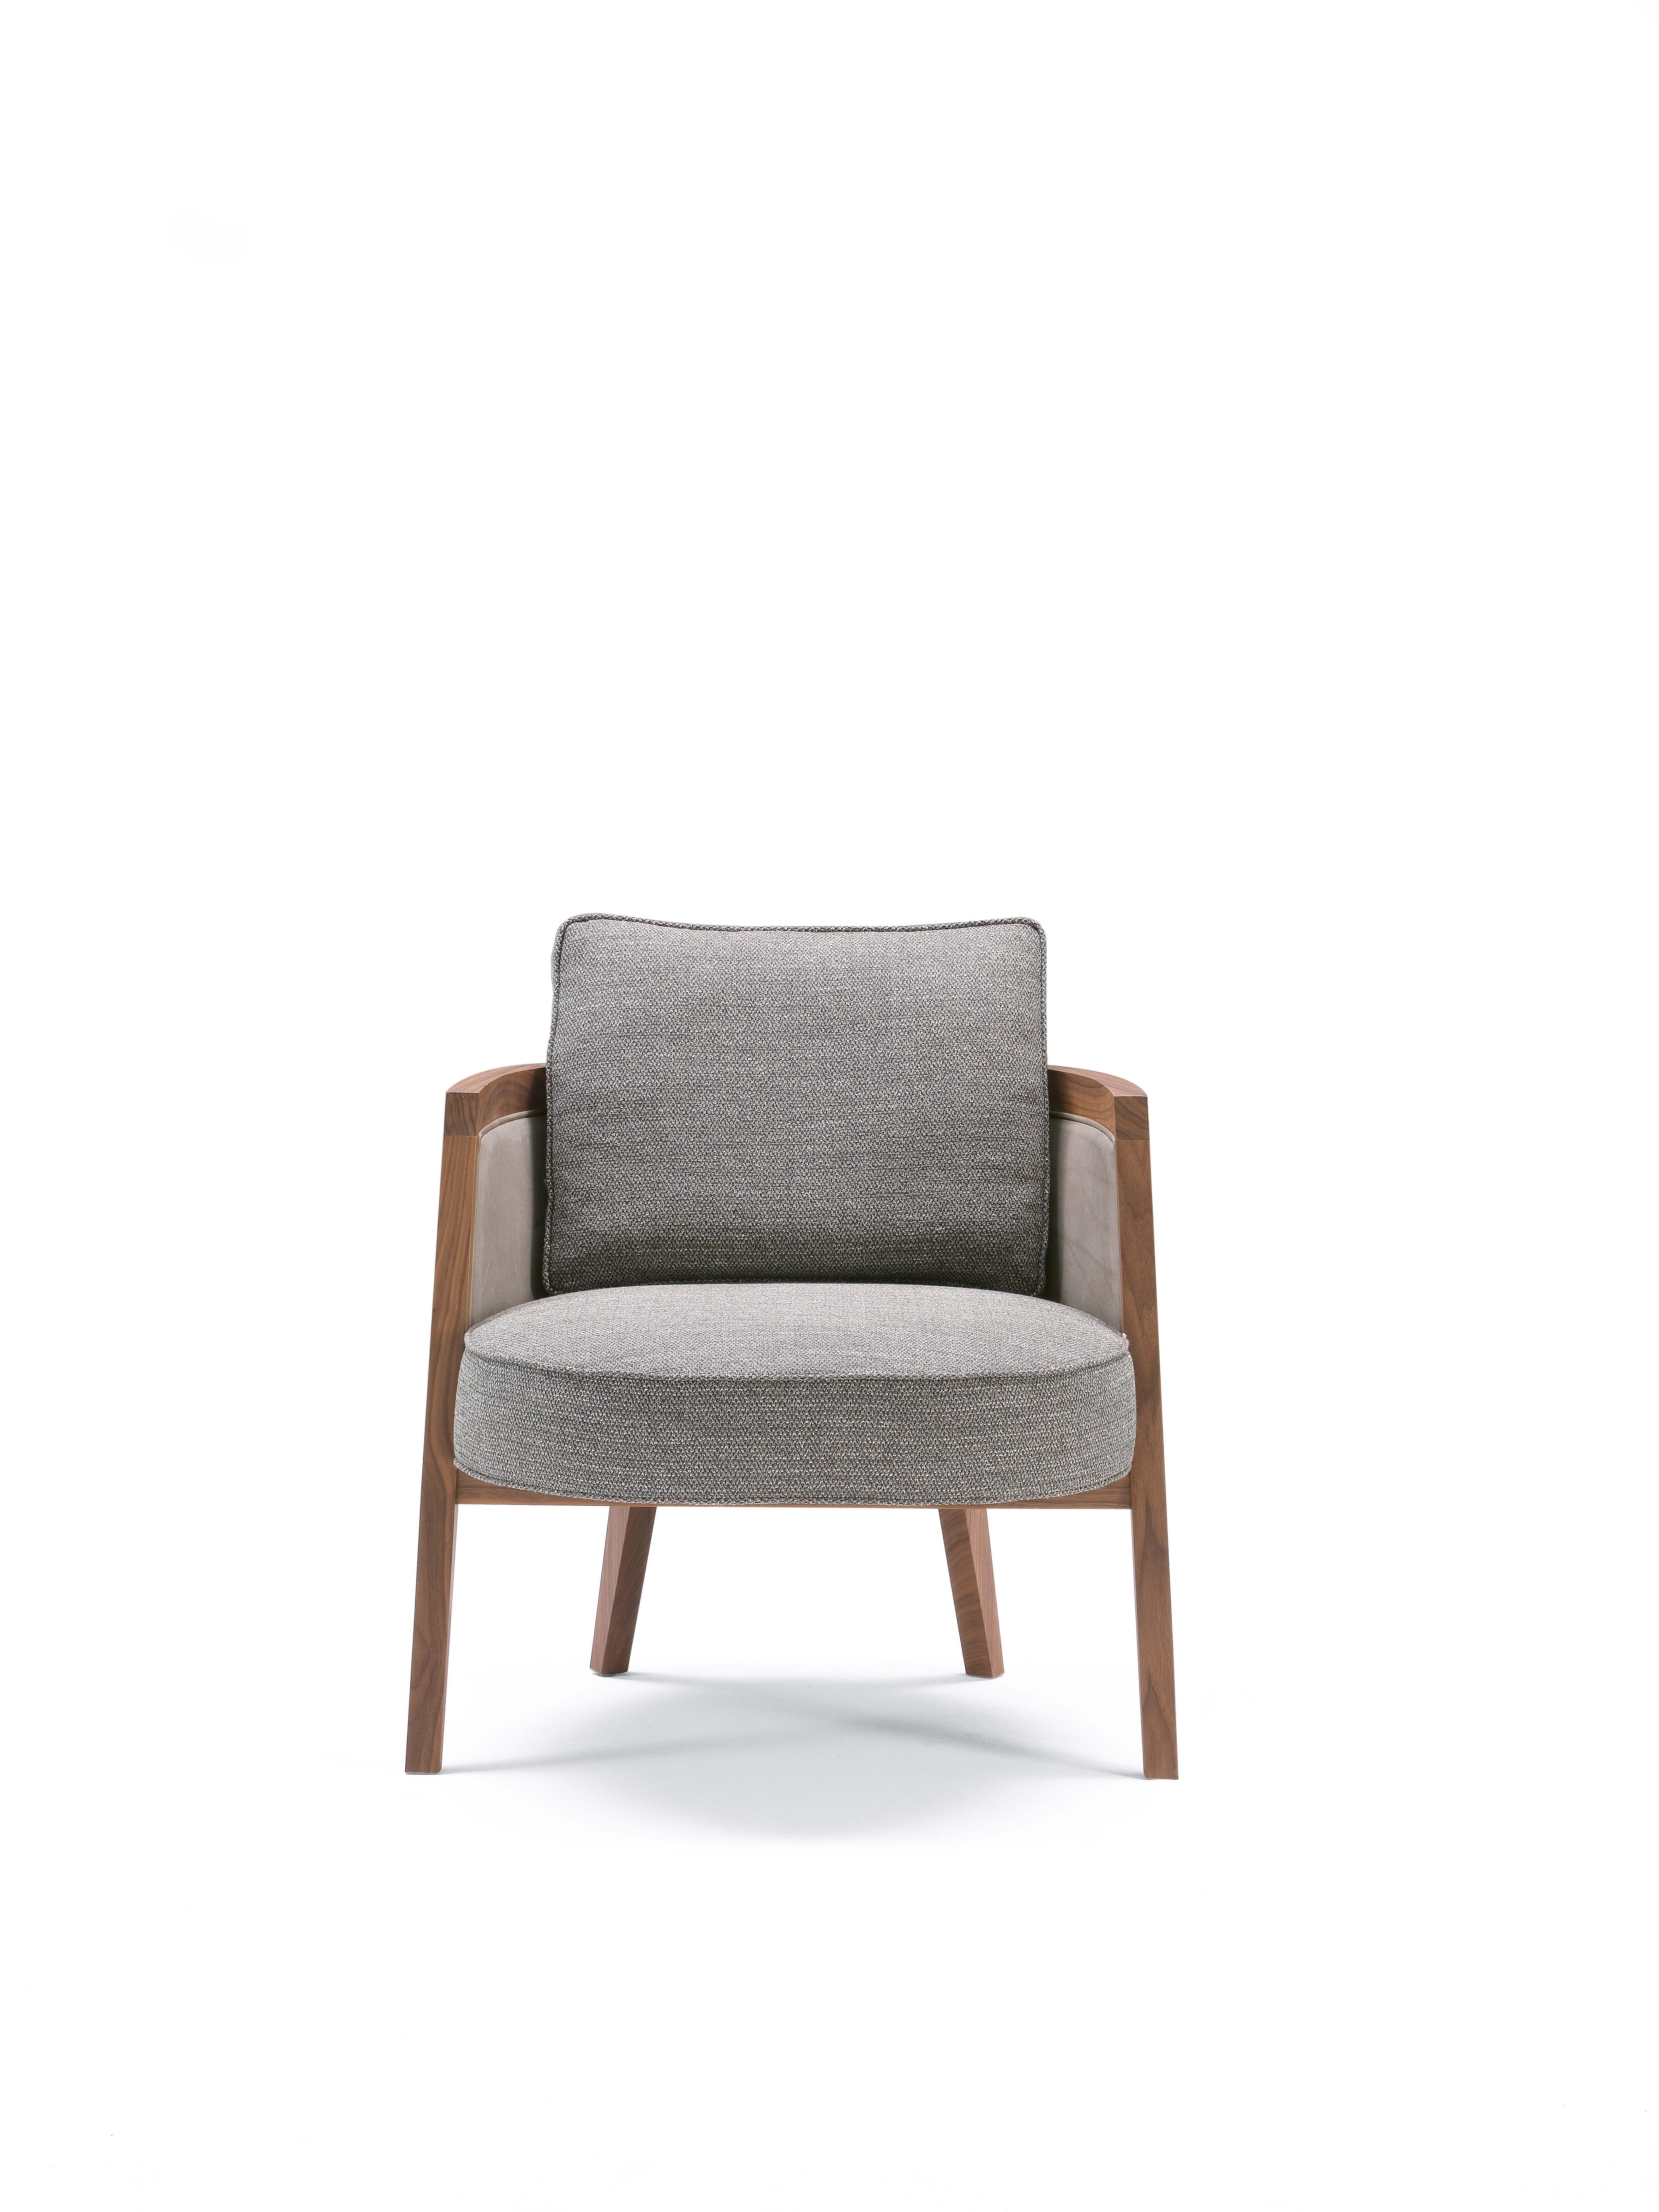 Pacini & Cappellini Cocoon Armchair in Grey by Giuliano & Gabriele Cappellettii In New Condition For Sale In New York, NY